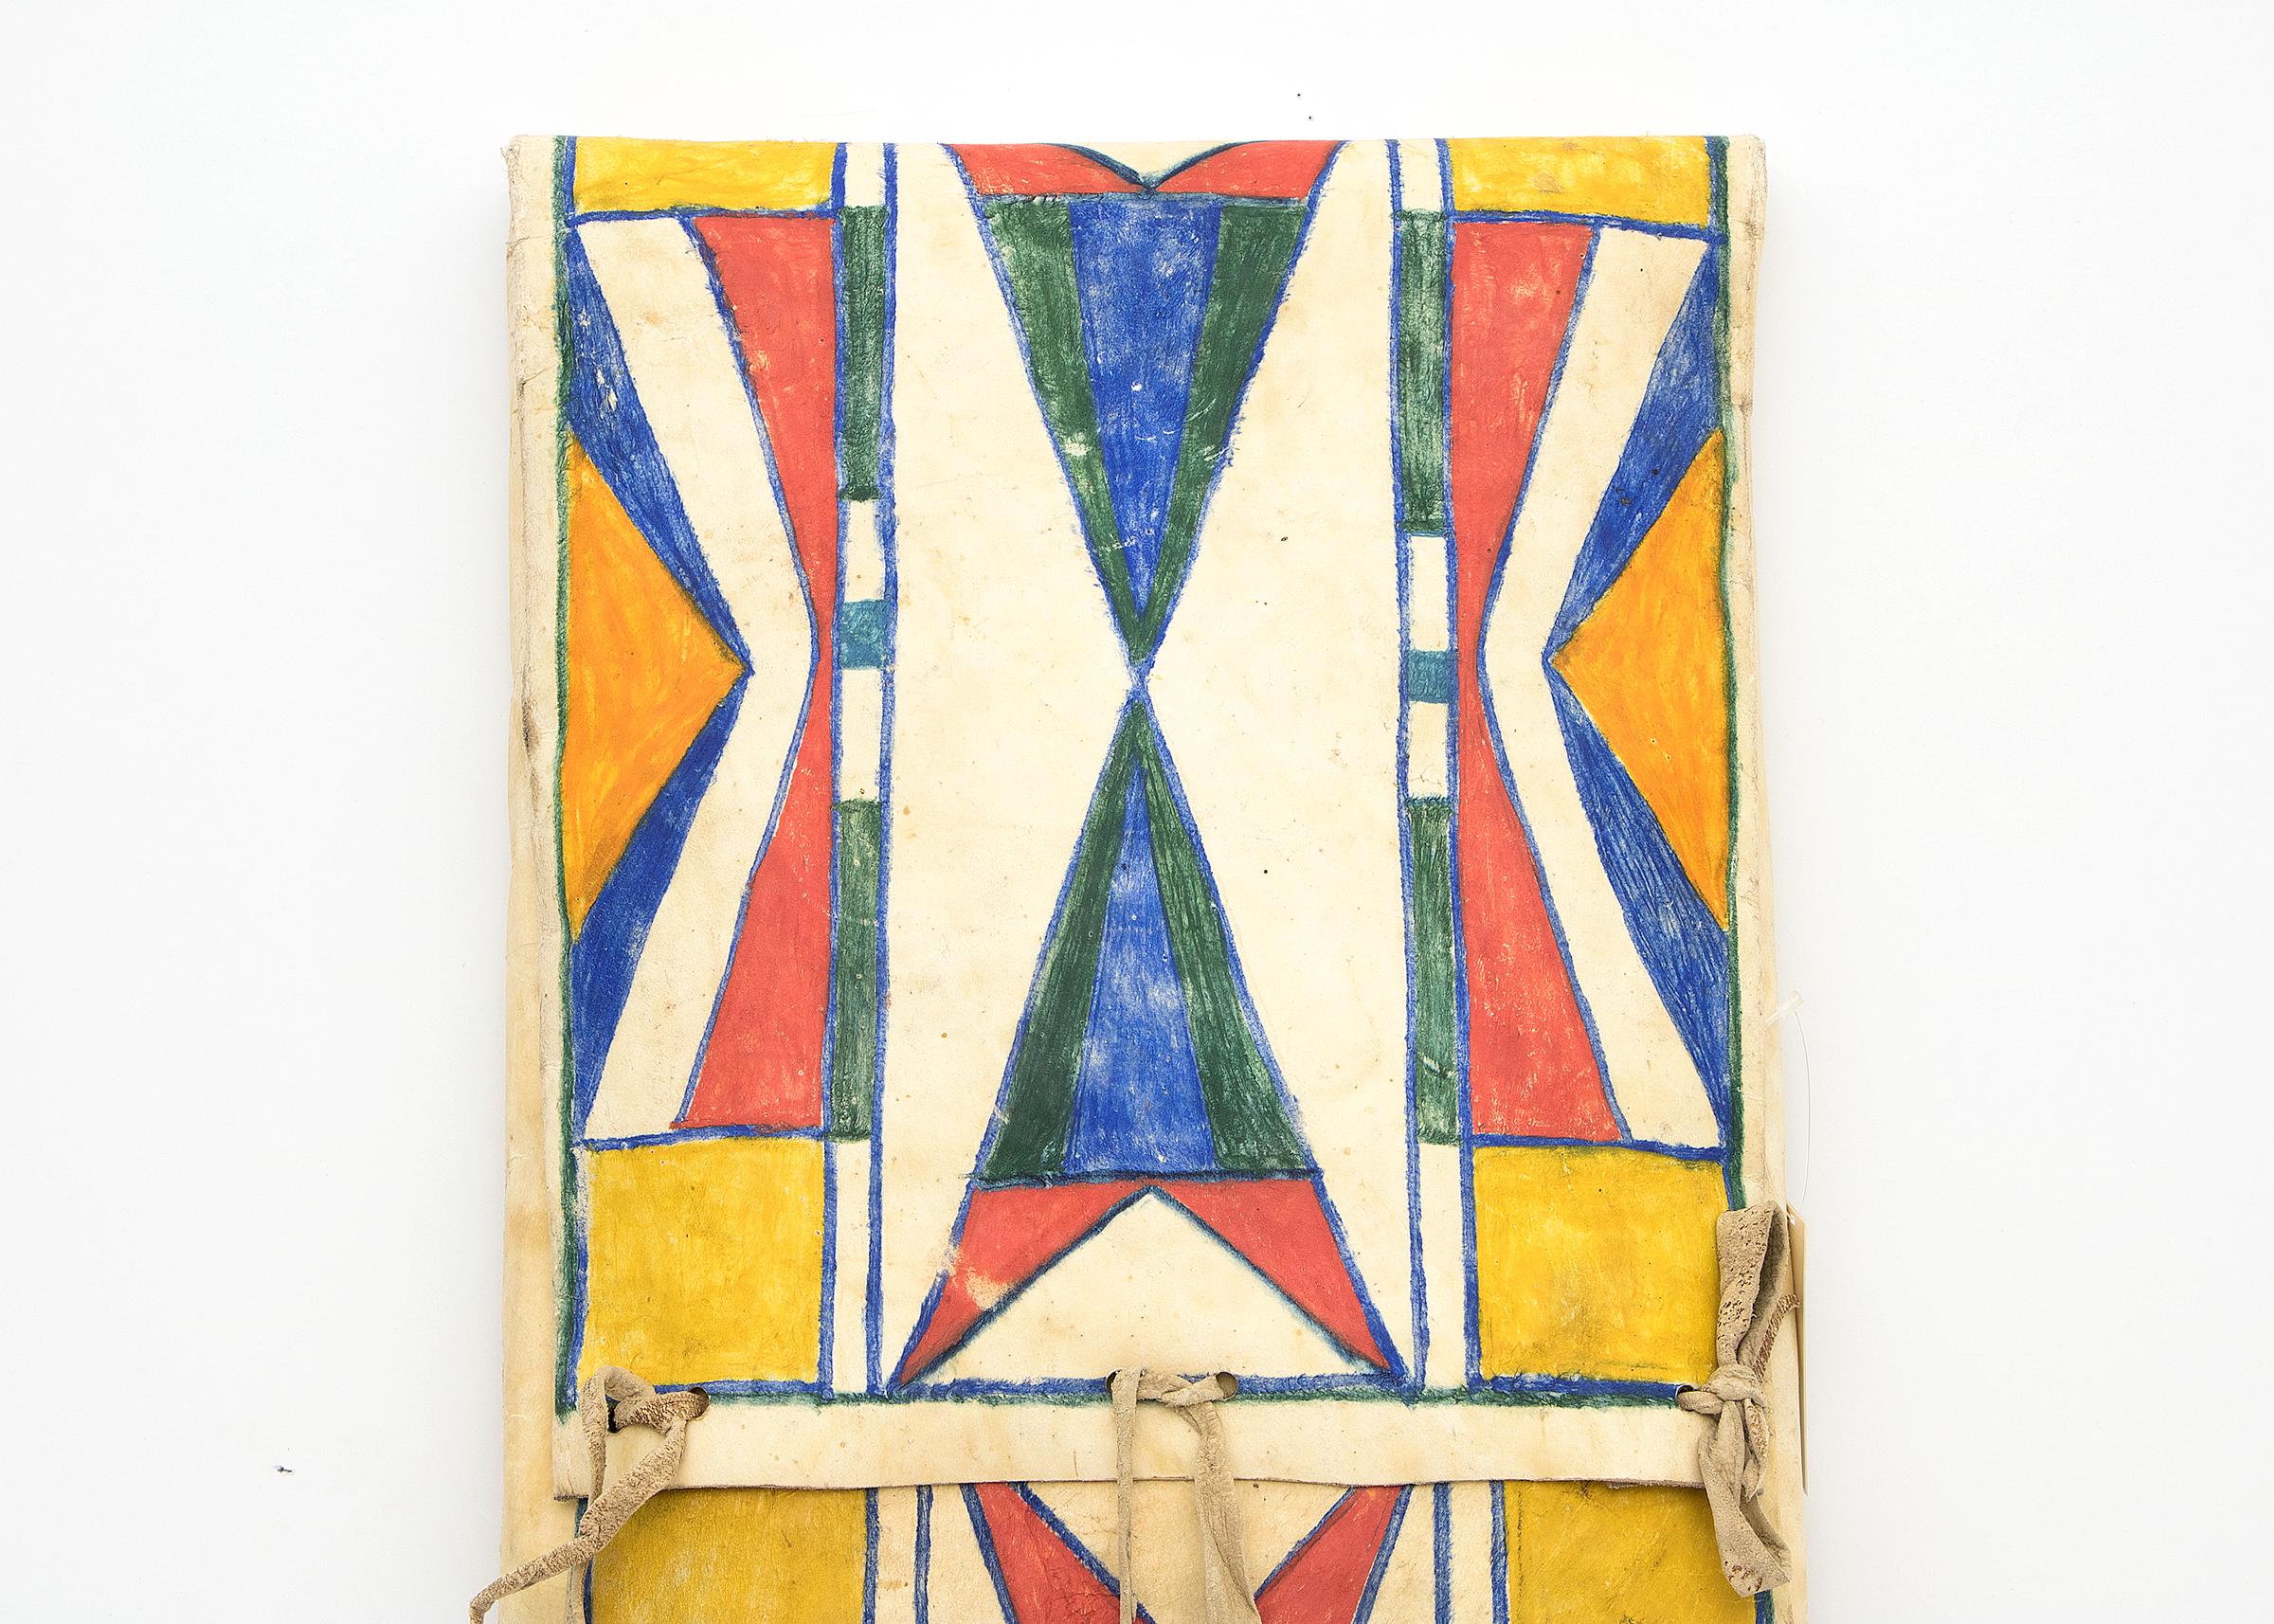 19th century vintage Native American Parfleche container in an envelope form, finely painted circa 1890 in an abstract design with blue, yellow, orange and red by a North American Indian artist of the Plateau Tribe. Makes a stunning wall hanging or